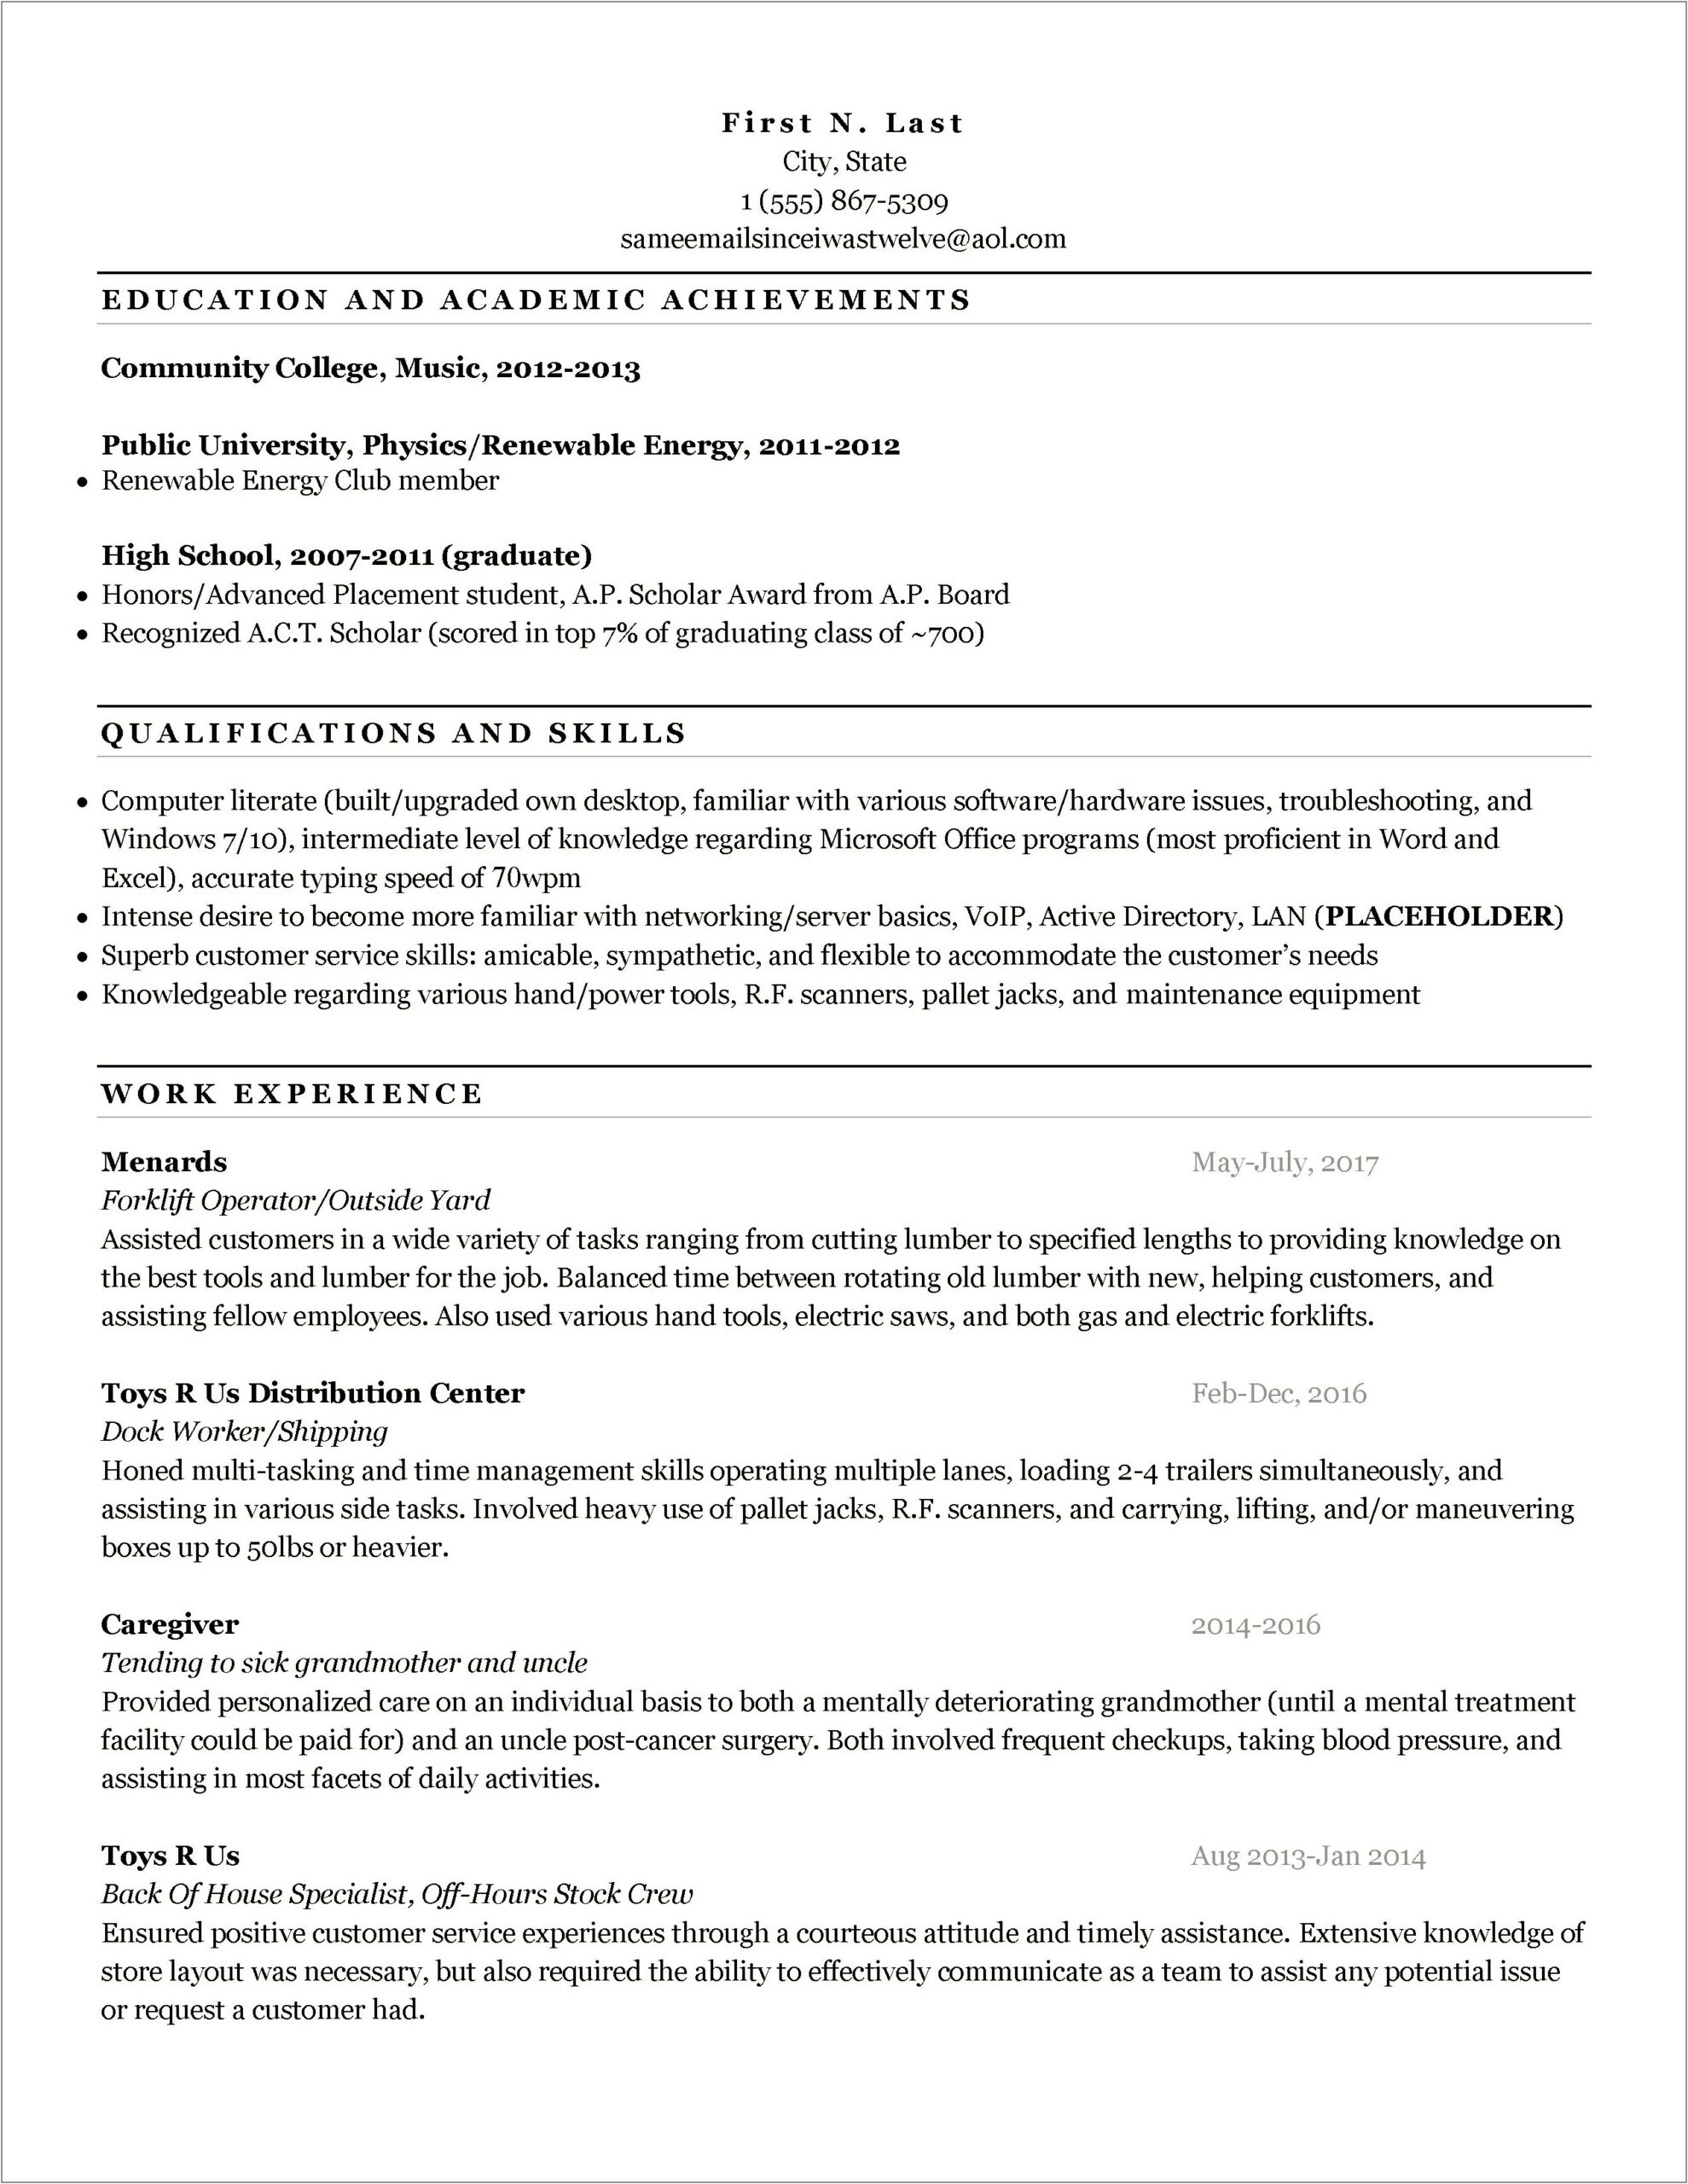 Should I Remove High School From Resume